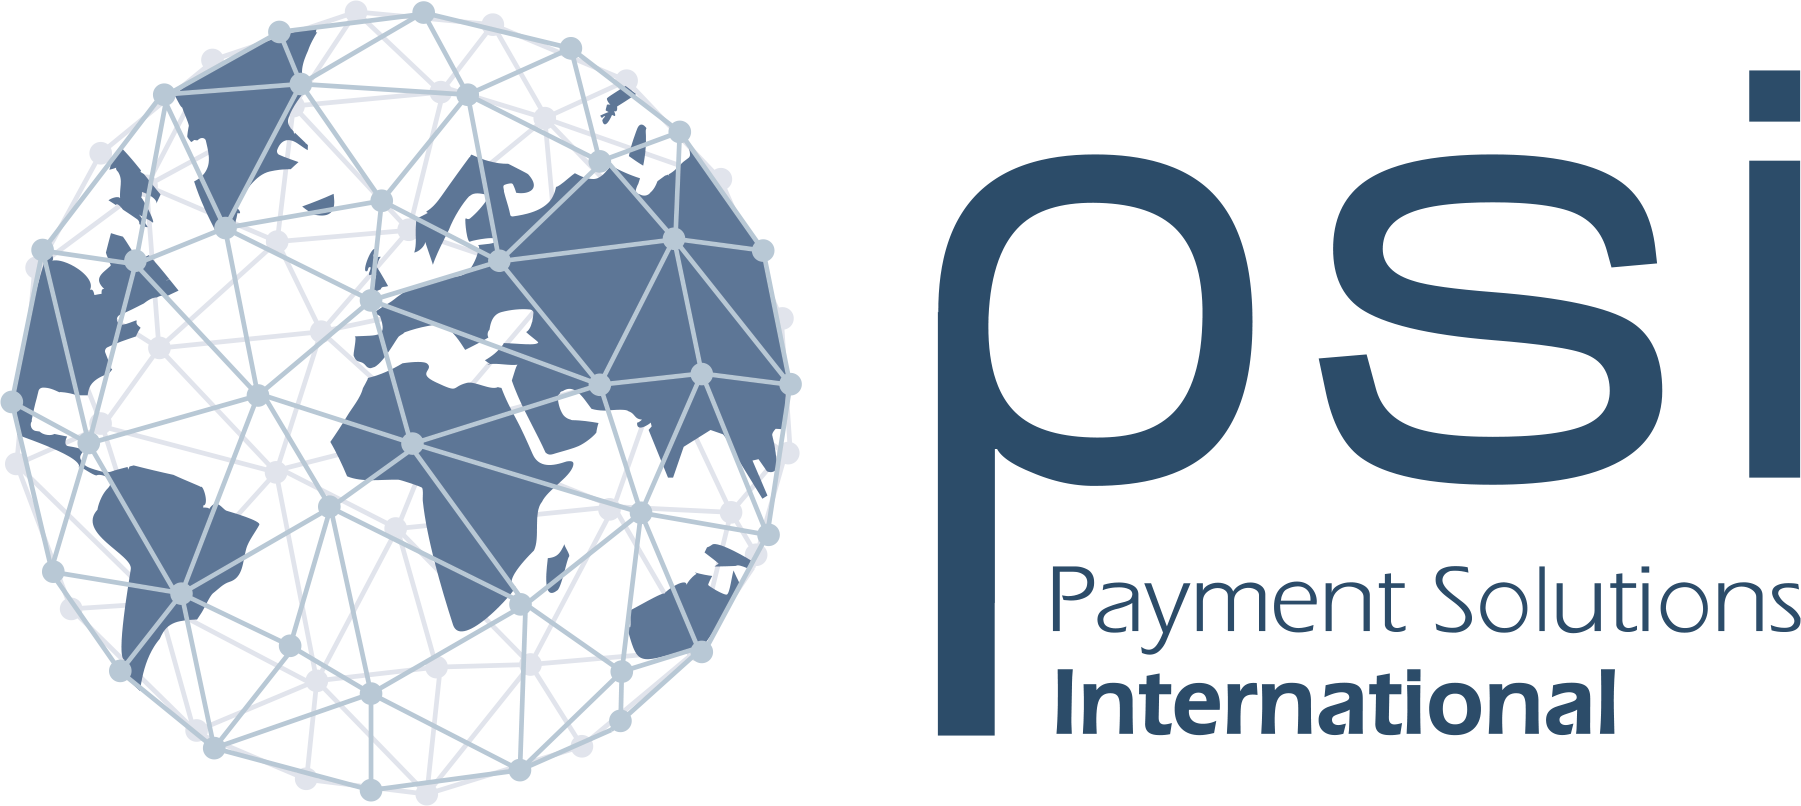 Payment Solutions International